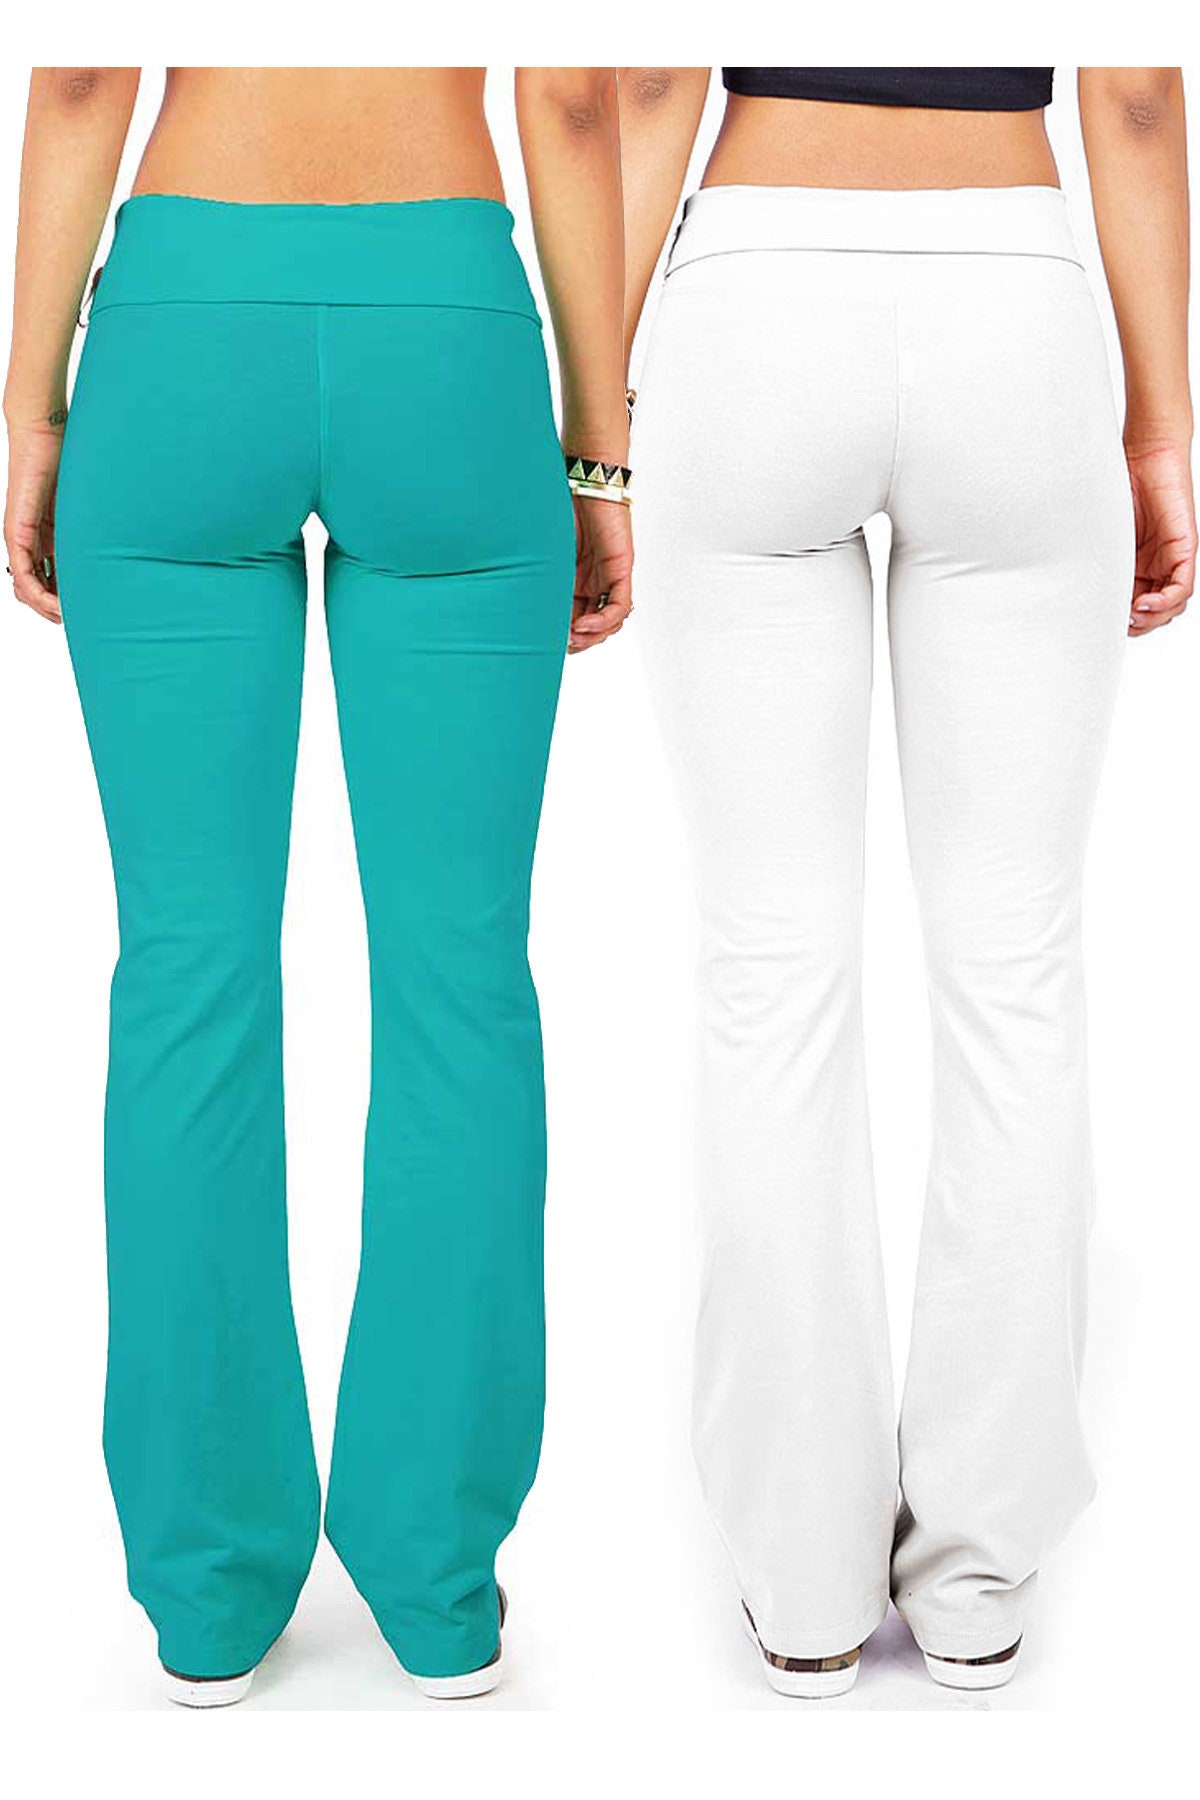 Women's High Waisted Bootcut Yoga Pants Stretch Tie Solor Color